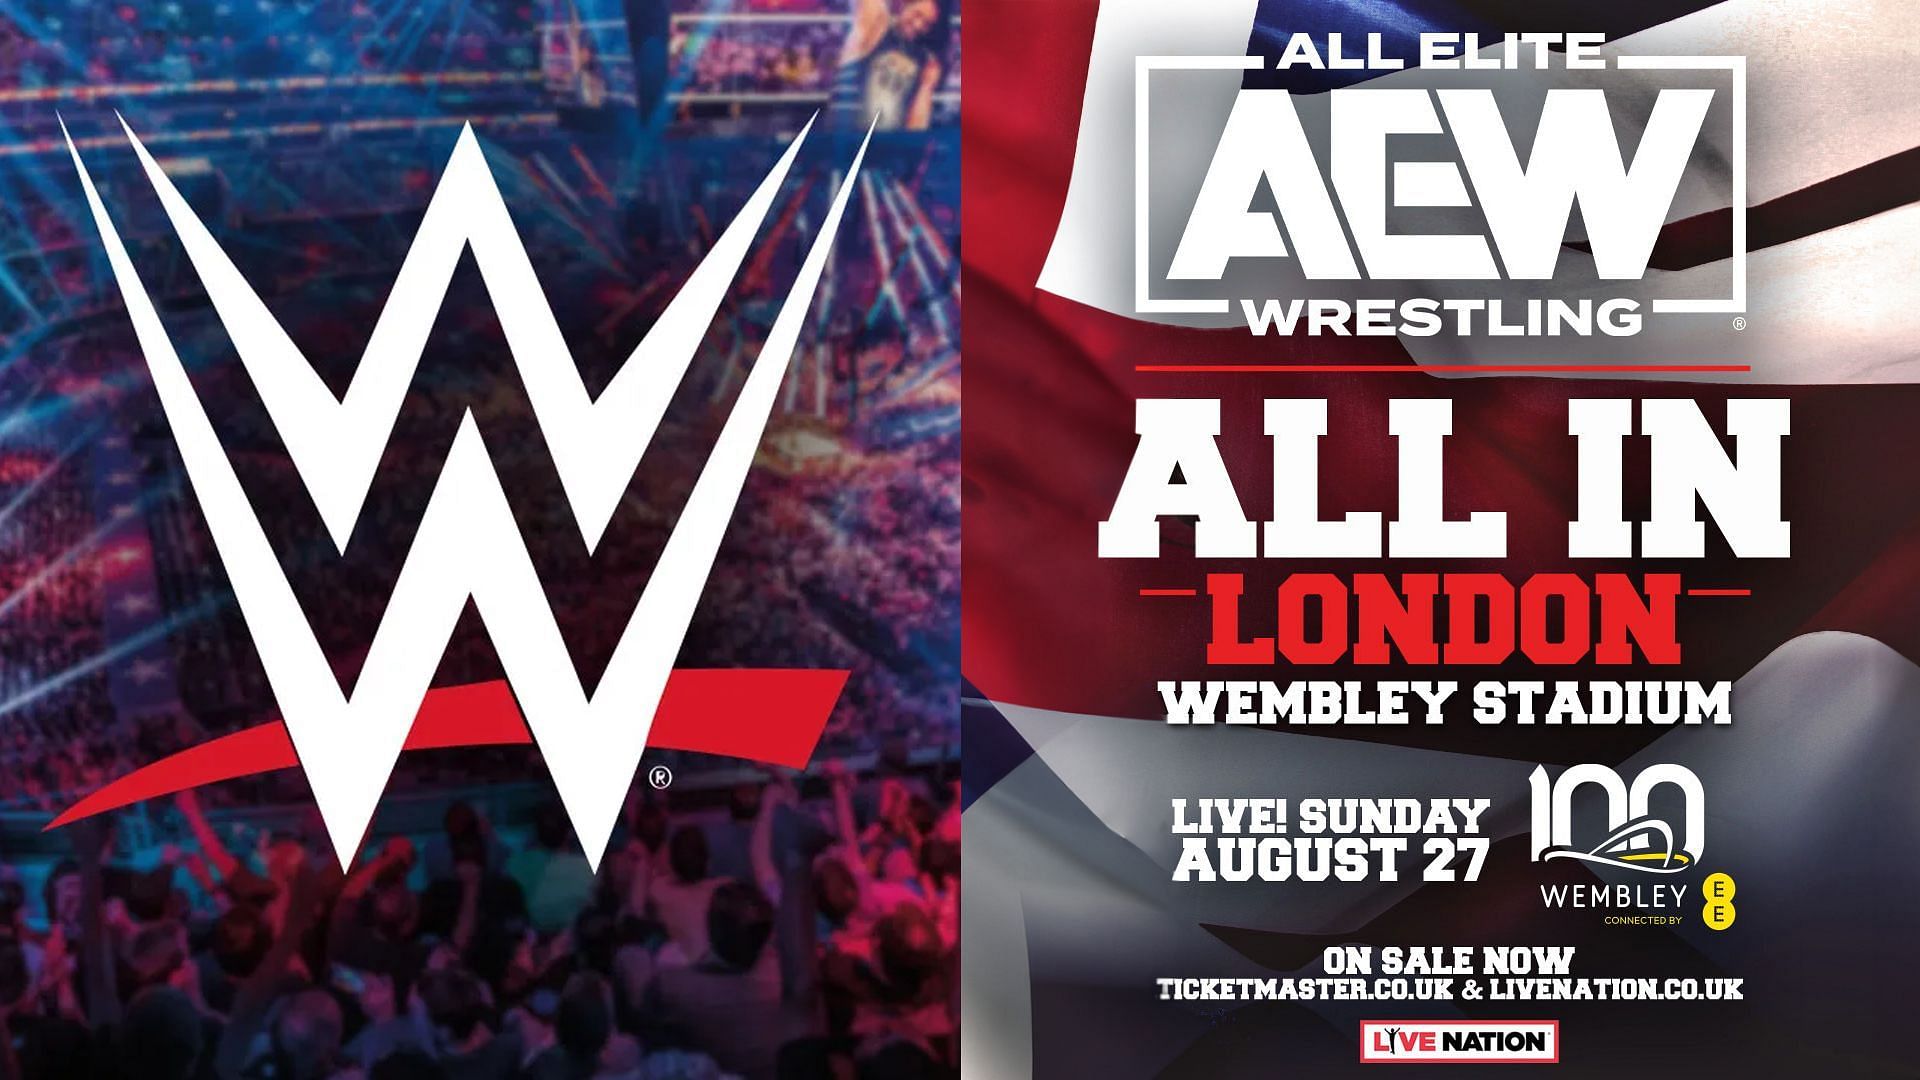 Several former WWE Superstars are set to appear at AEW All In